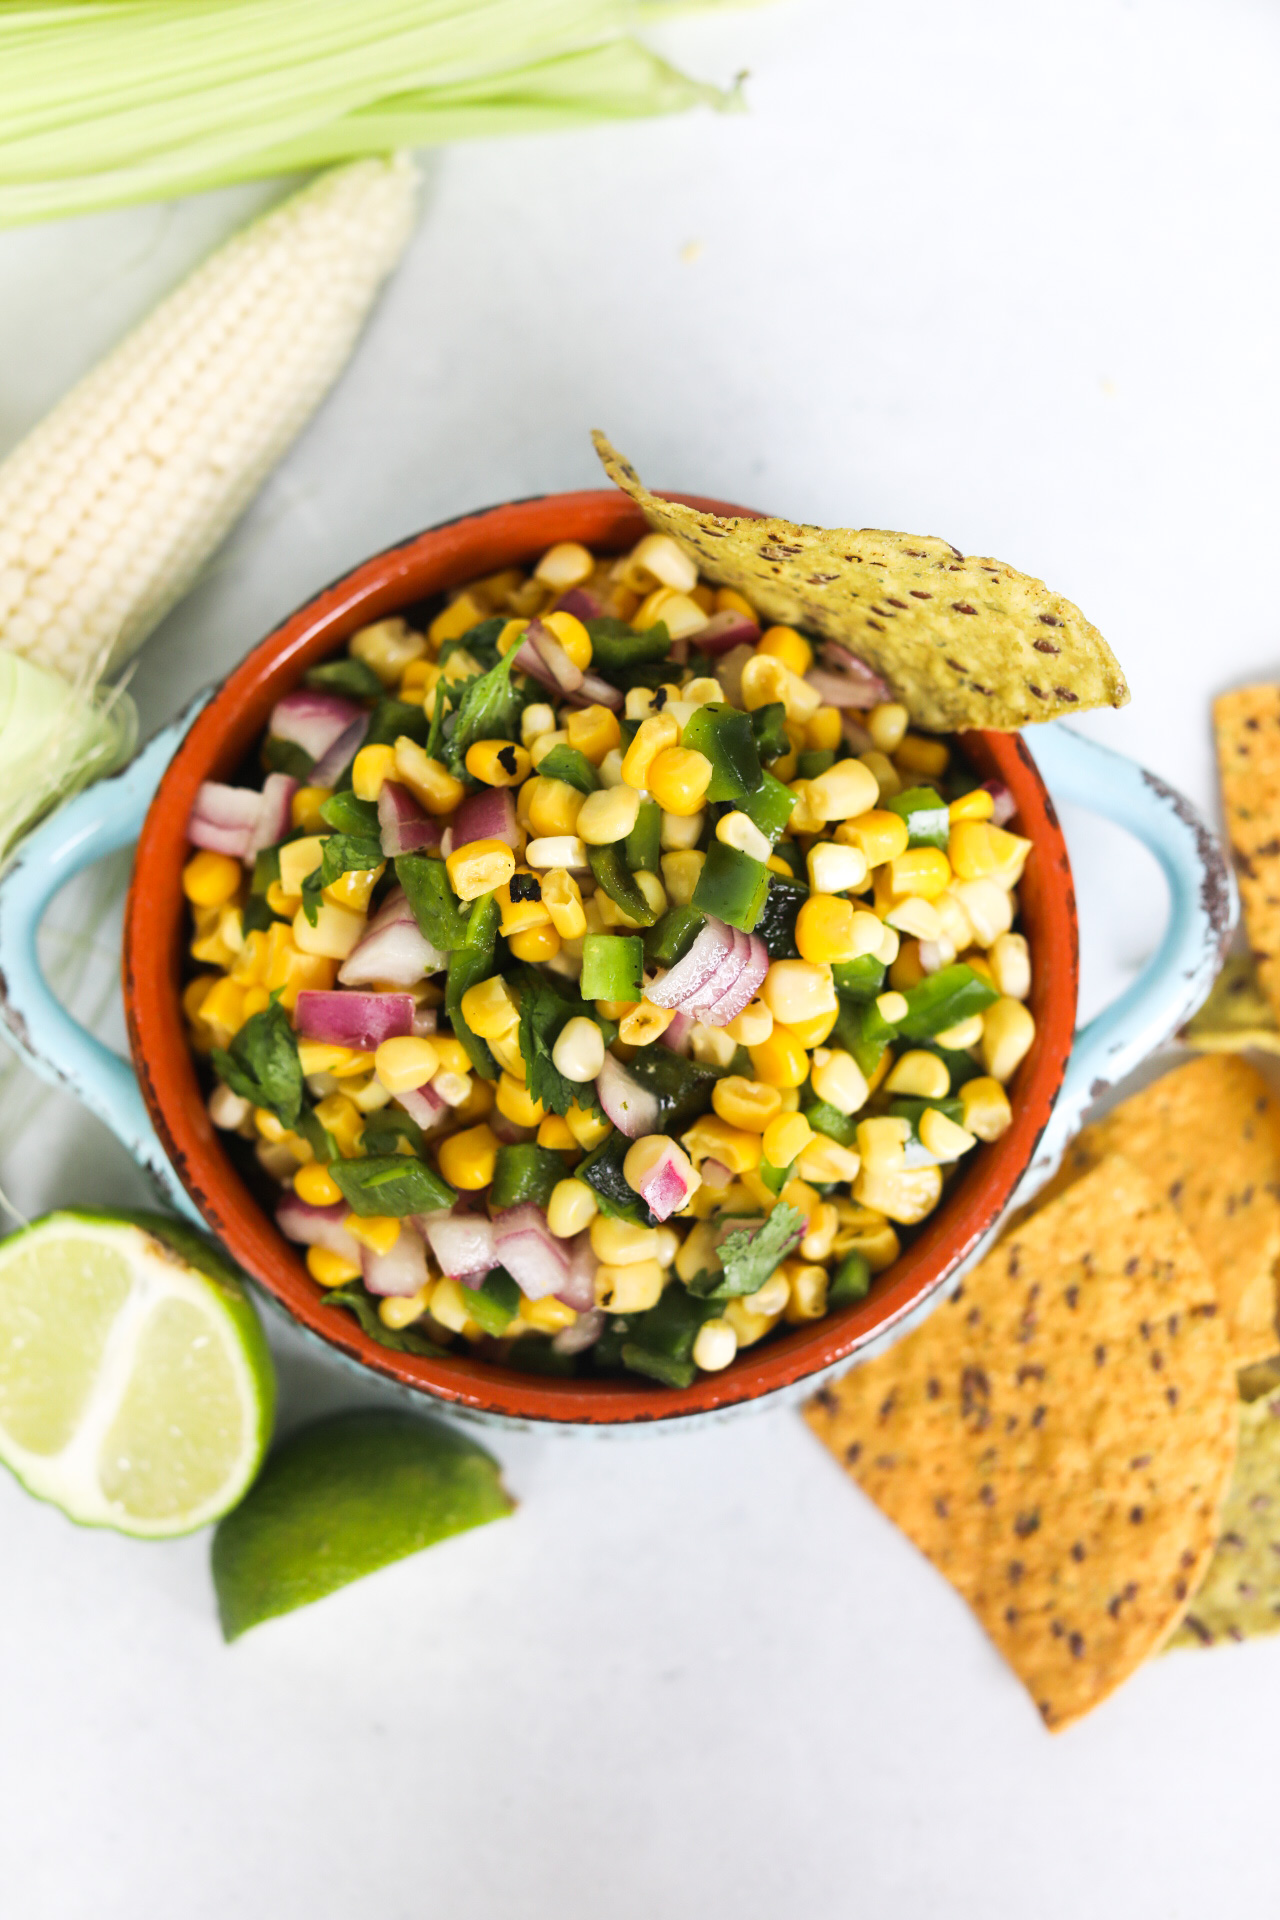 Corn salsa in a blue serving bowl in aerial view. Corn chip added for styling purposes as well as additional tortilla chips, sliced lime wedges and an ear of corn.